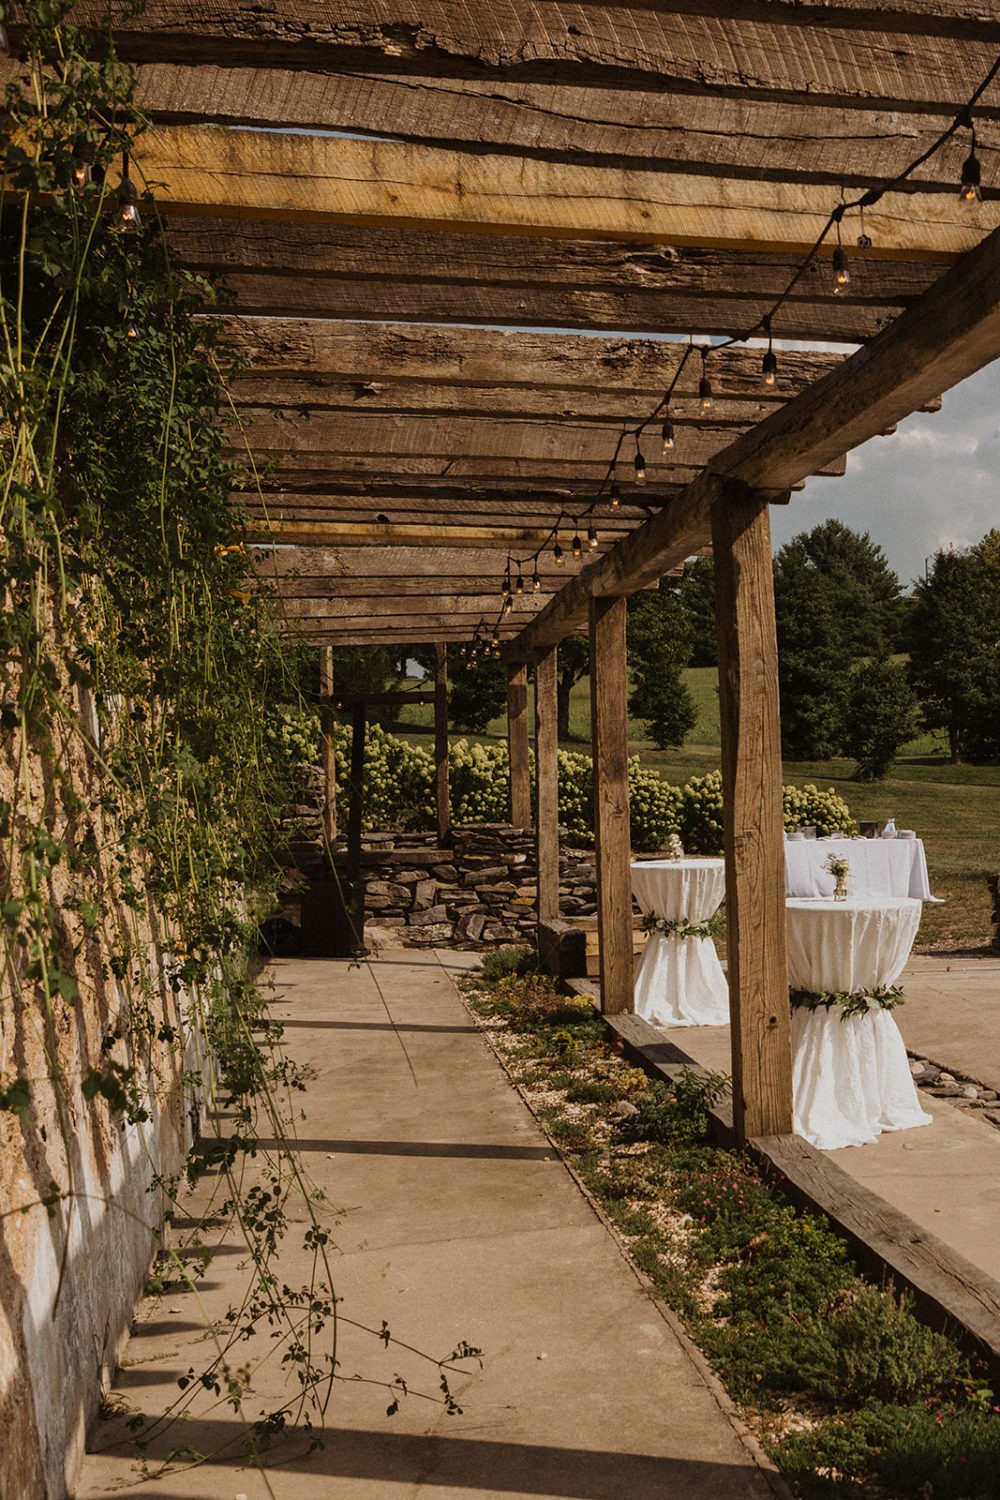 cocktail hour tables set up beside ivy-covered barn ruins